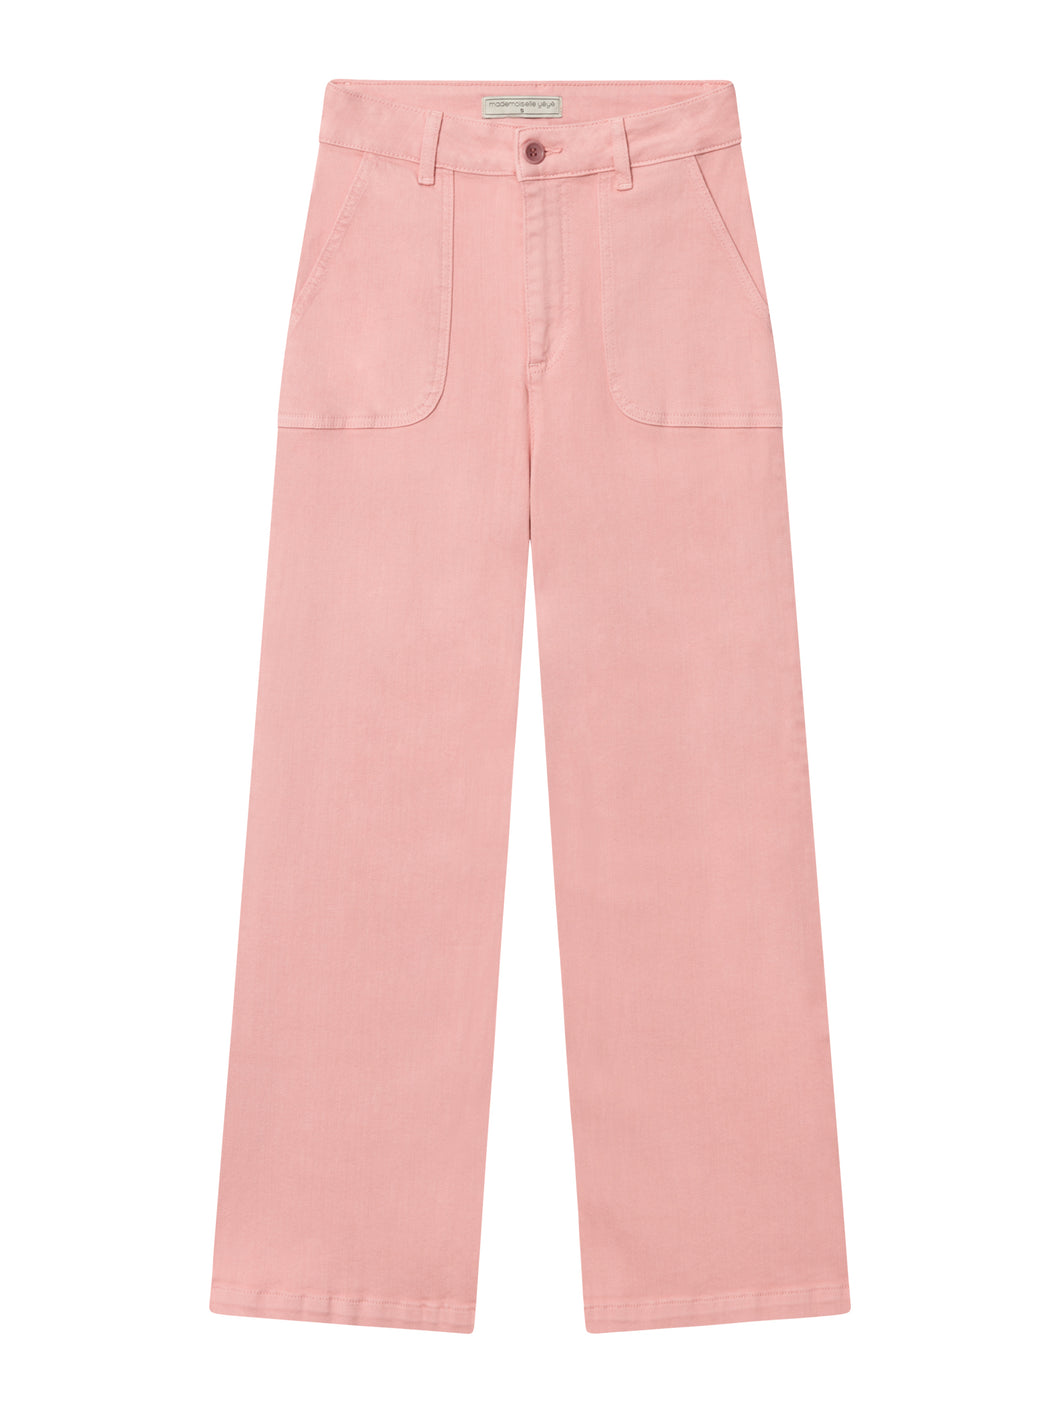 Always Flawless Trouser - Pink